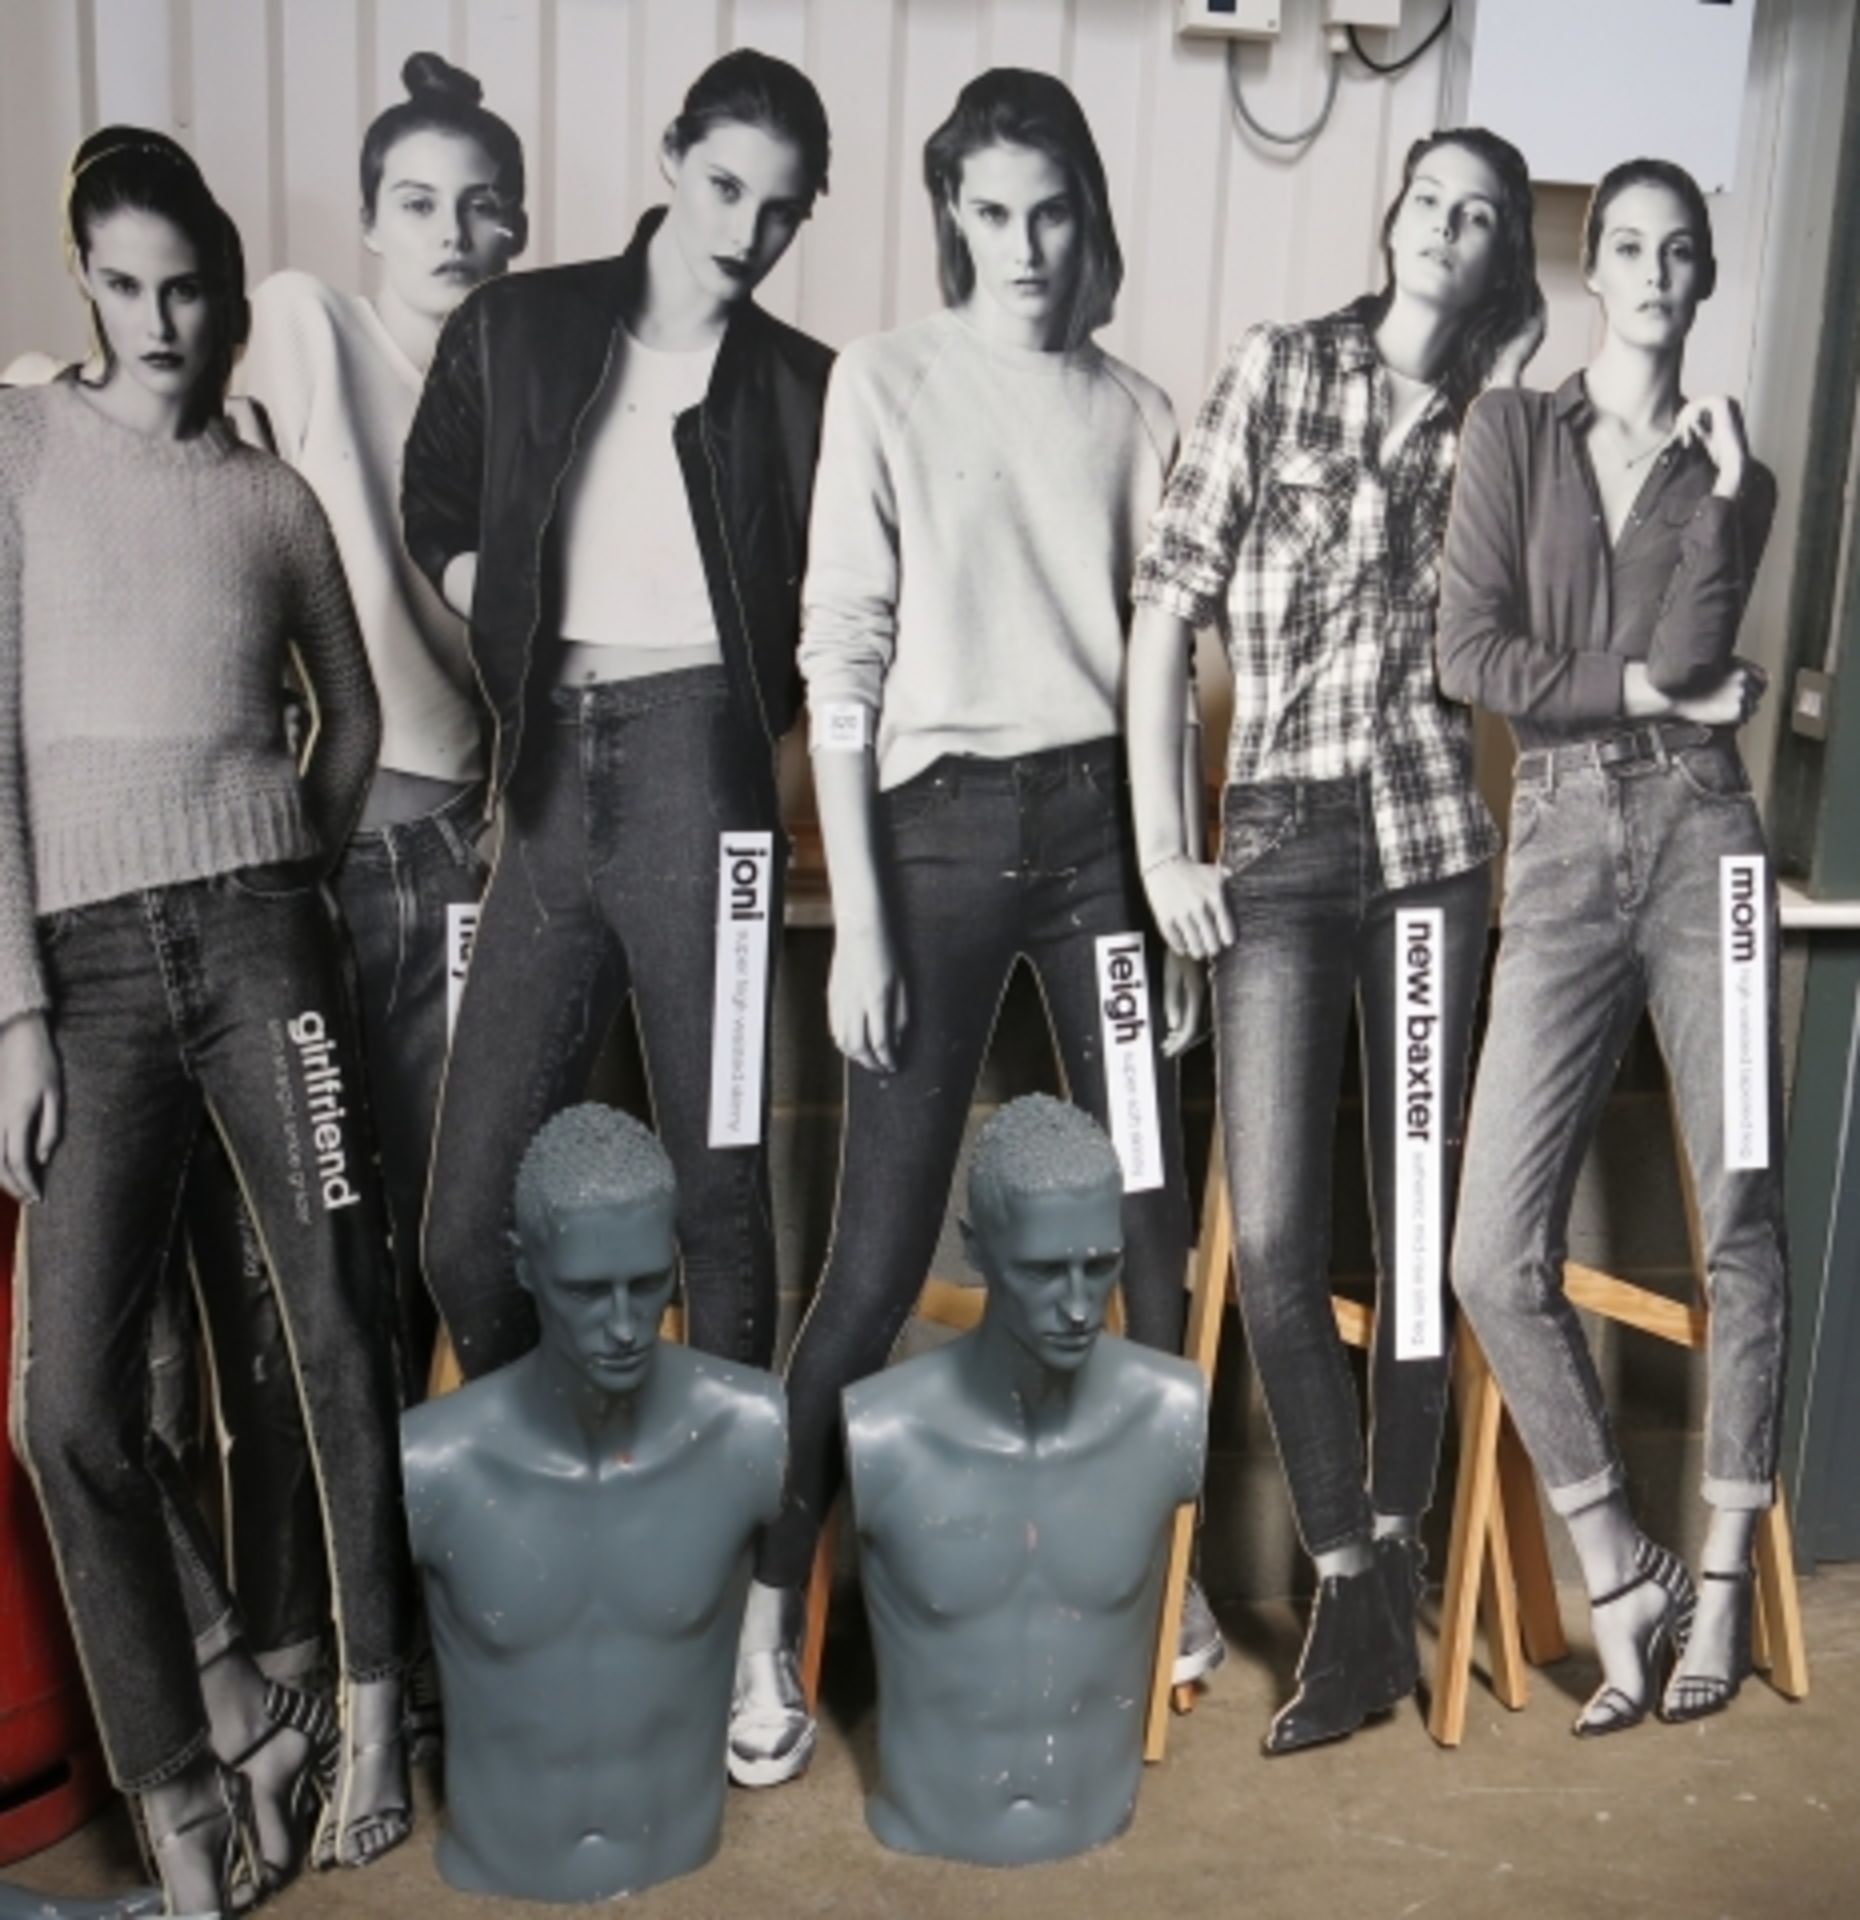 2 x Male mannequins and a selection of other shop displays